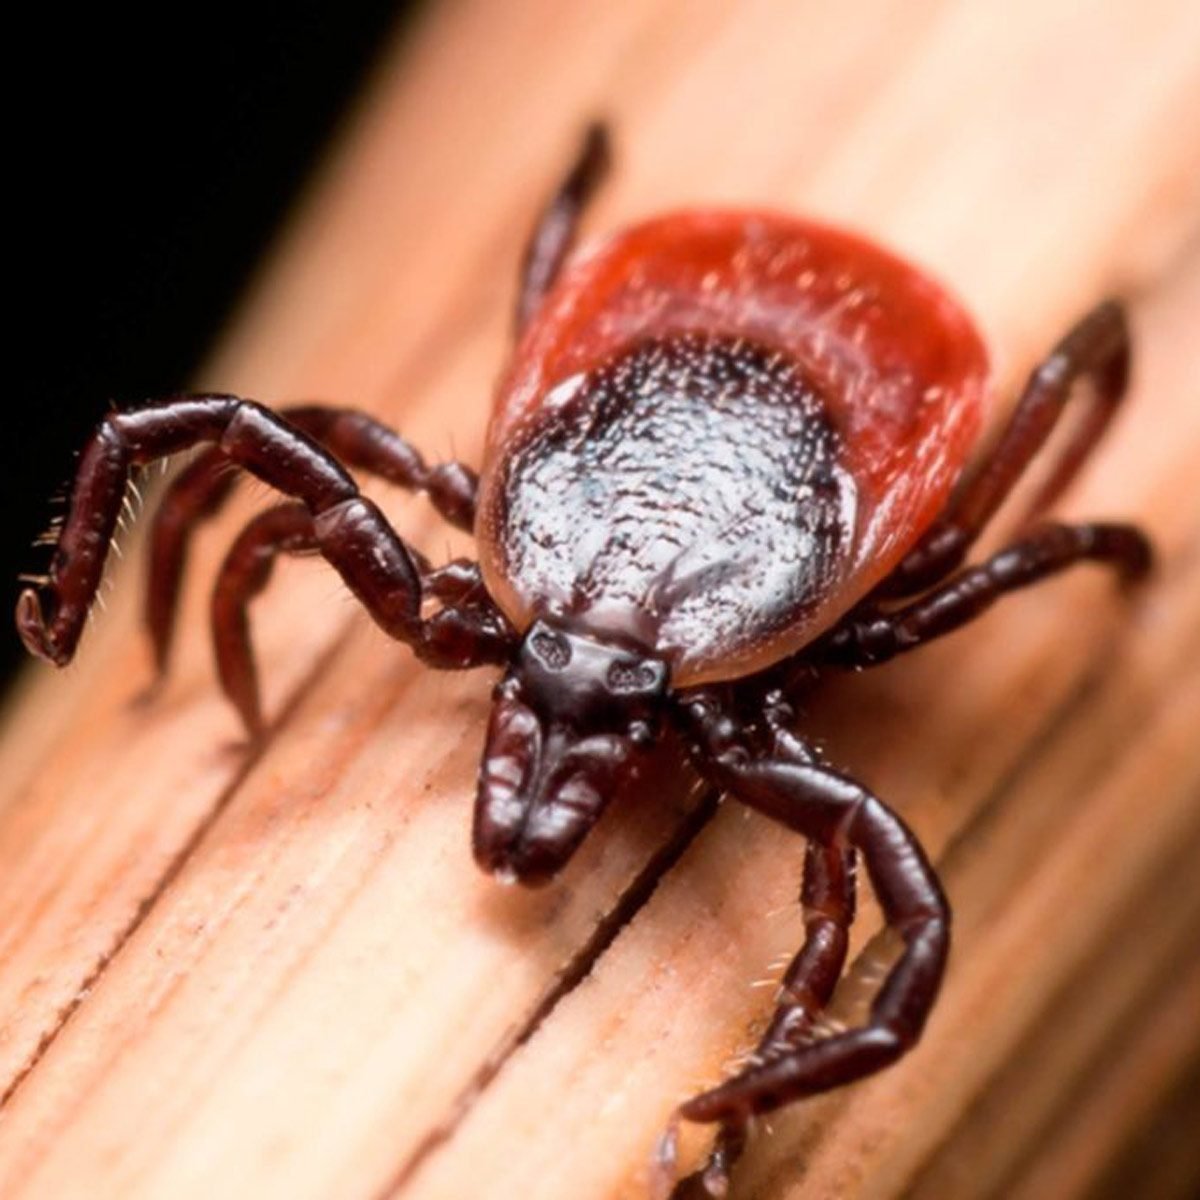  What to Do When You Find a Tick in Your House